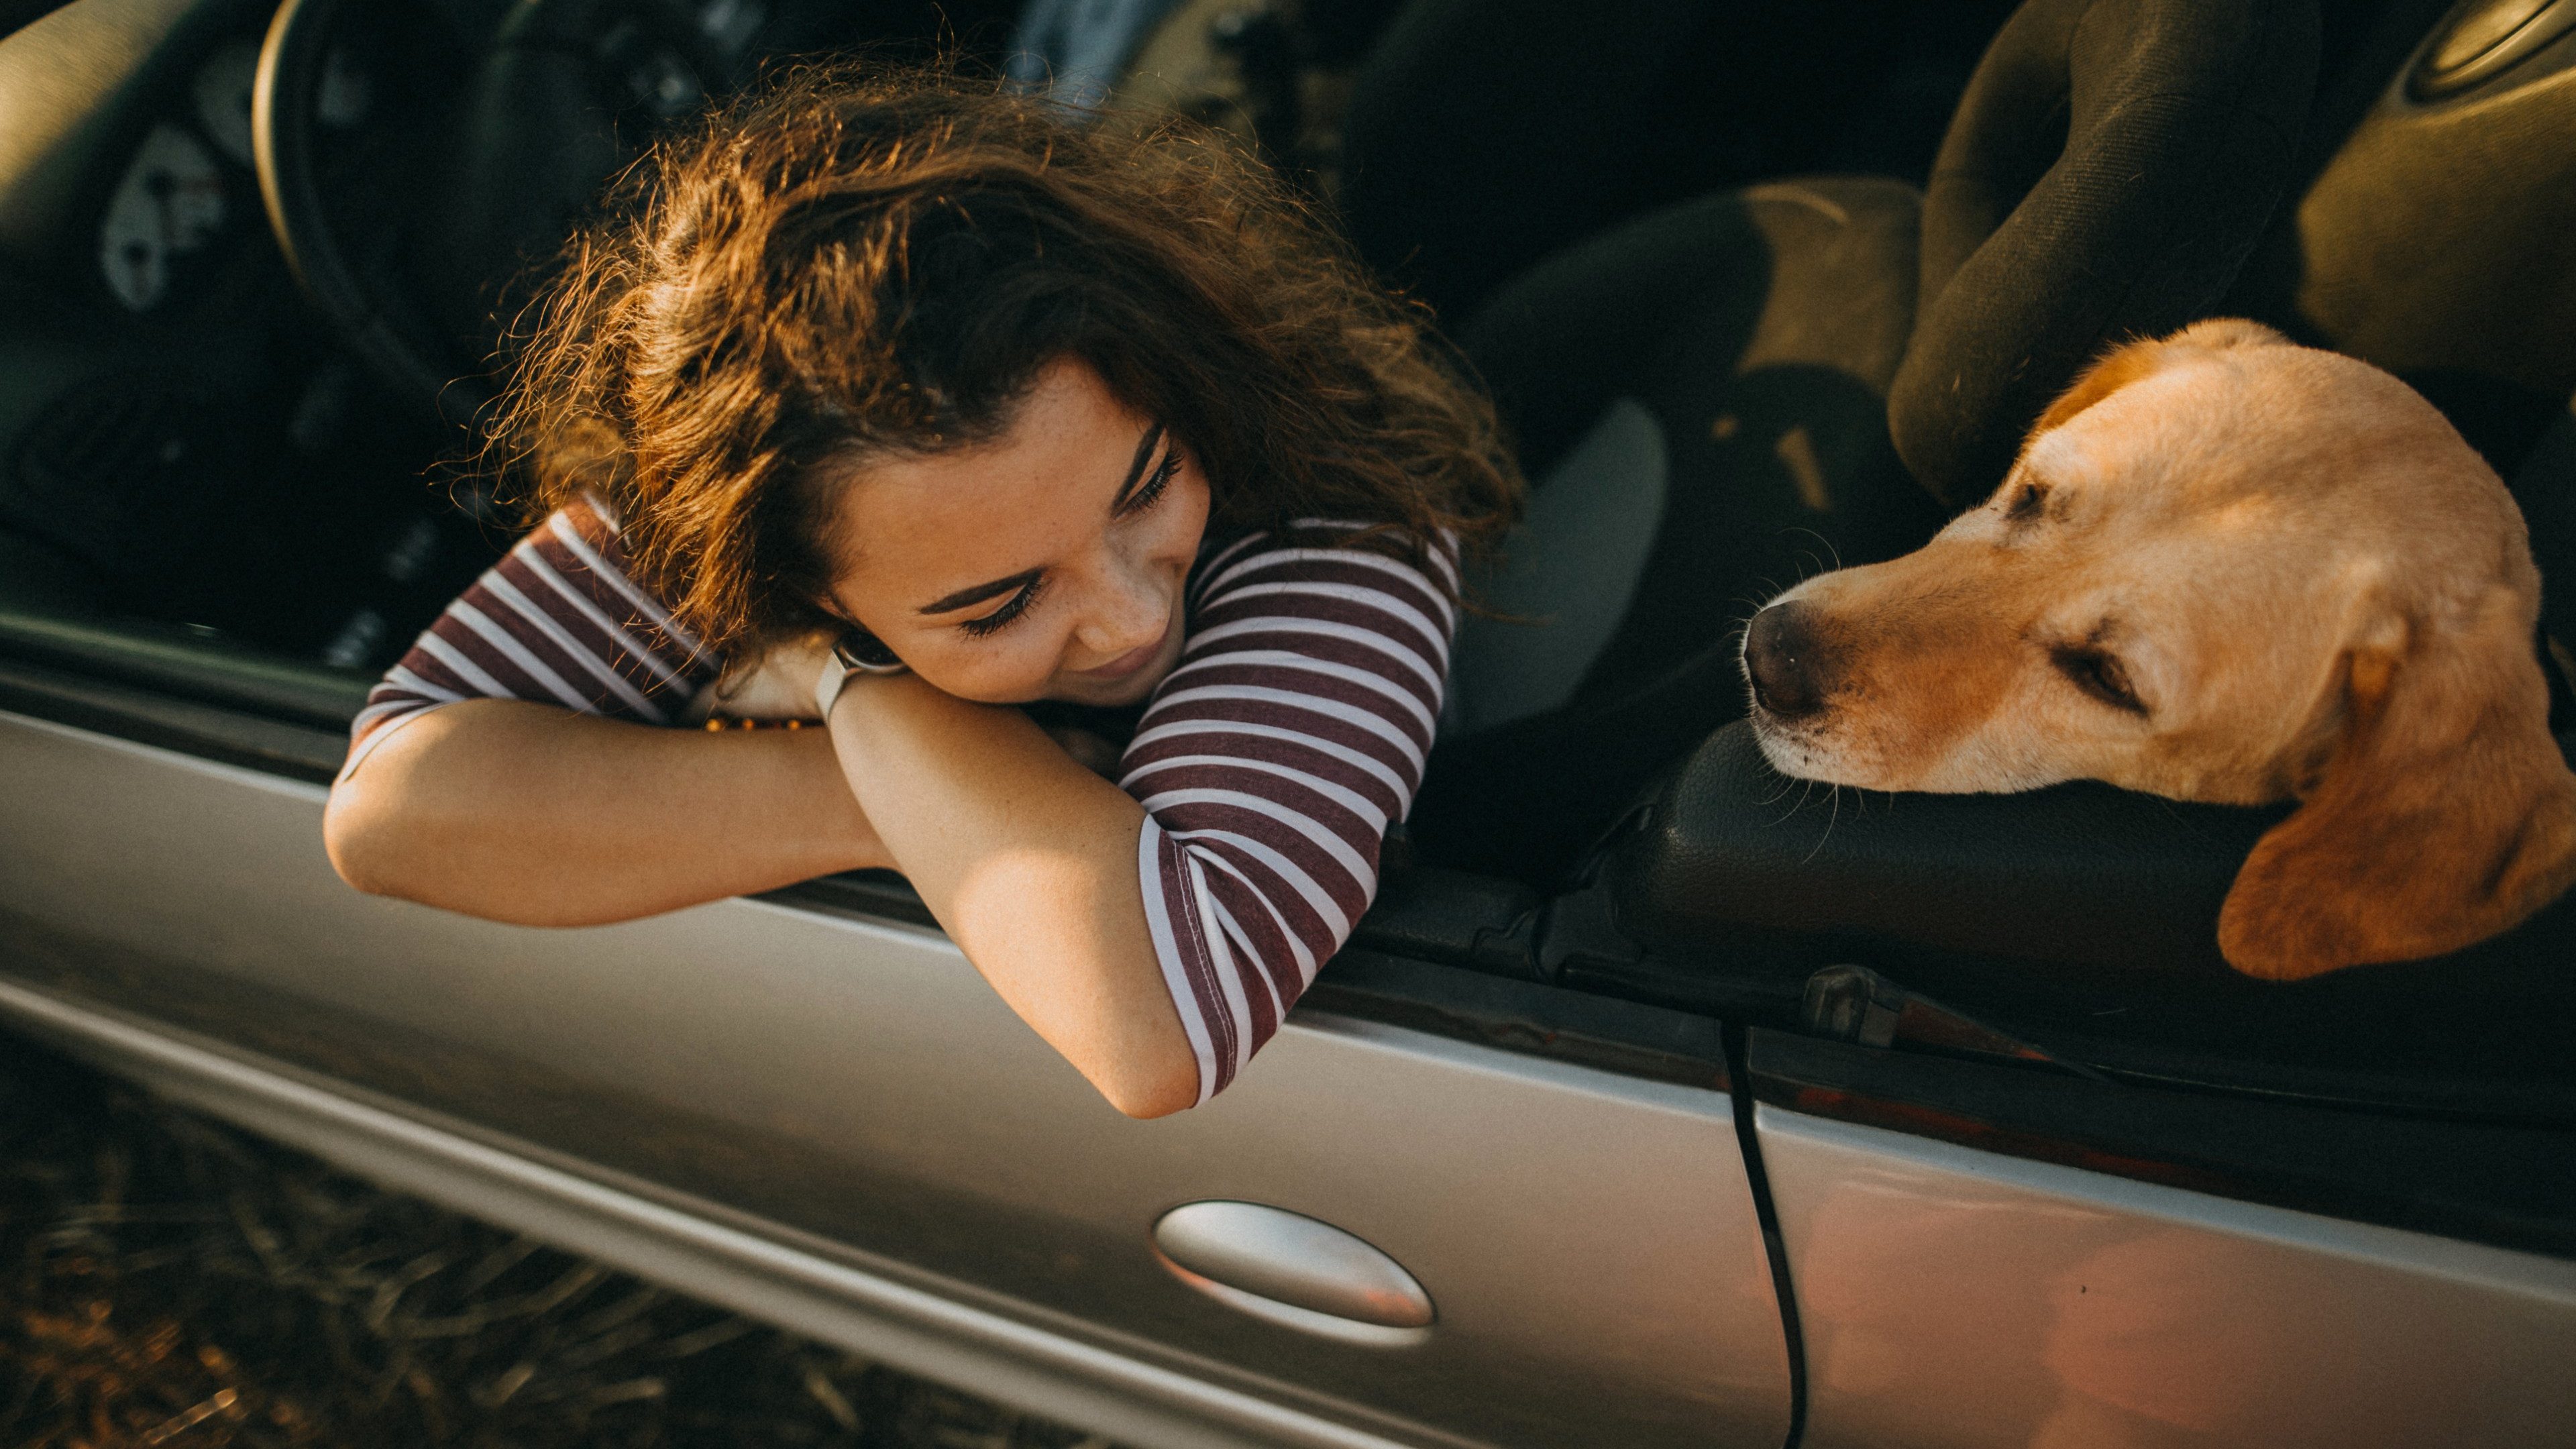 Girl with curly hair leaning on the door of her convertible with dog